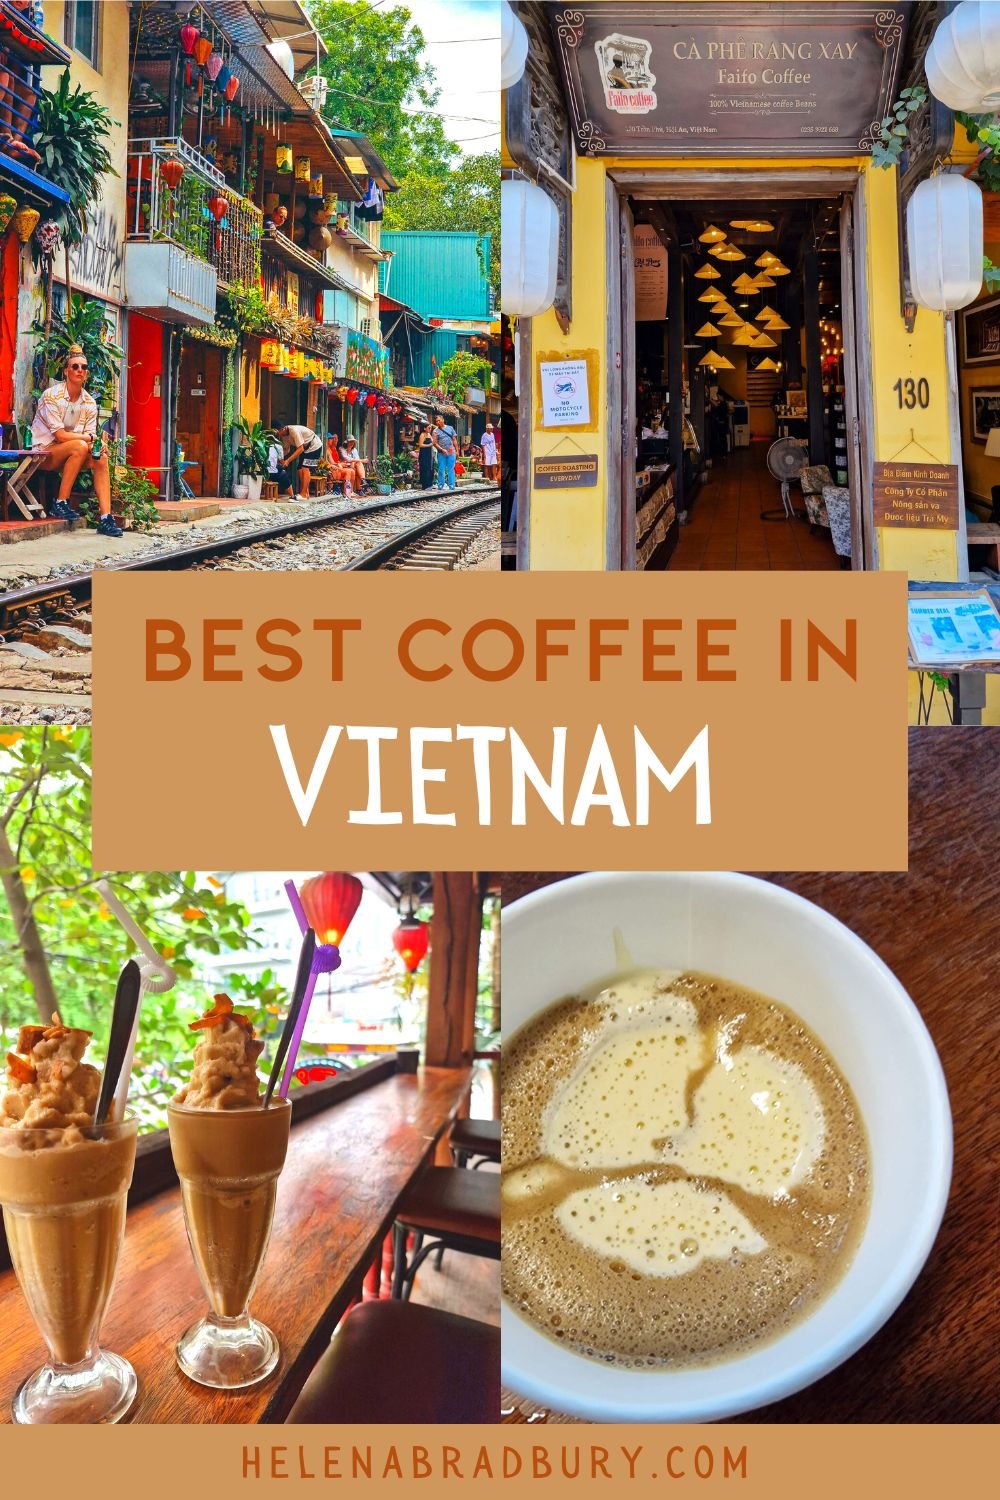 Vietnamese coffee culture is huge and local coffee is a must-try while in Vietnam. Here’s the best coffee in Vietnam to make sure you try during your stay.| best vietnamese coffee | hanoi egg coffee | vietnam food and drink | vietnam coffee shop l st